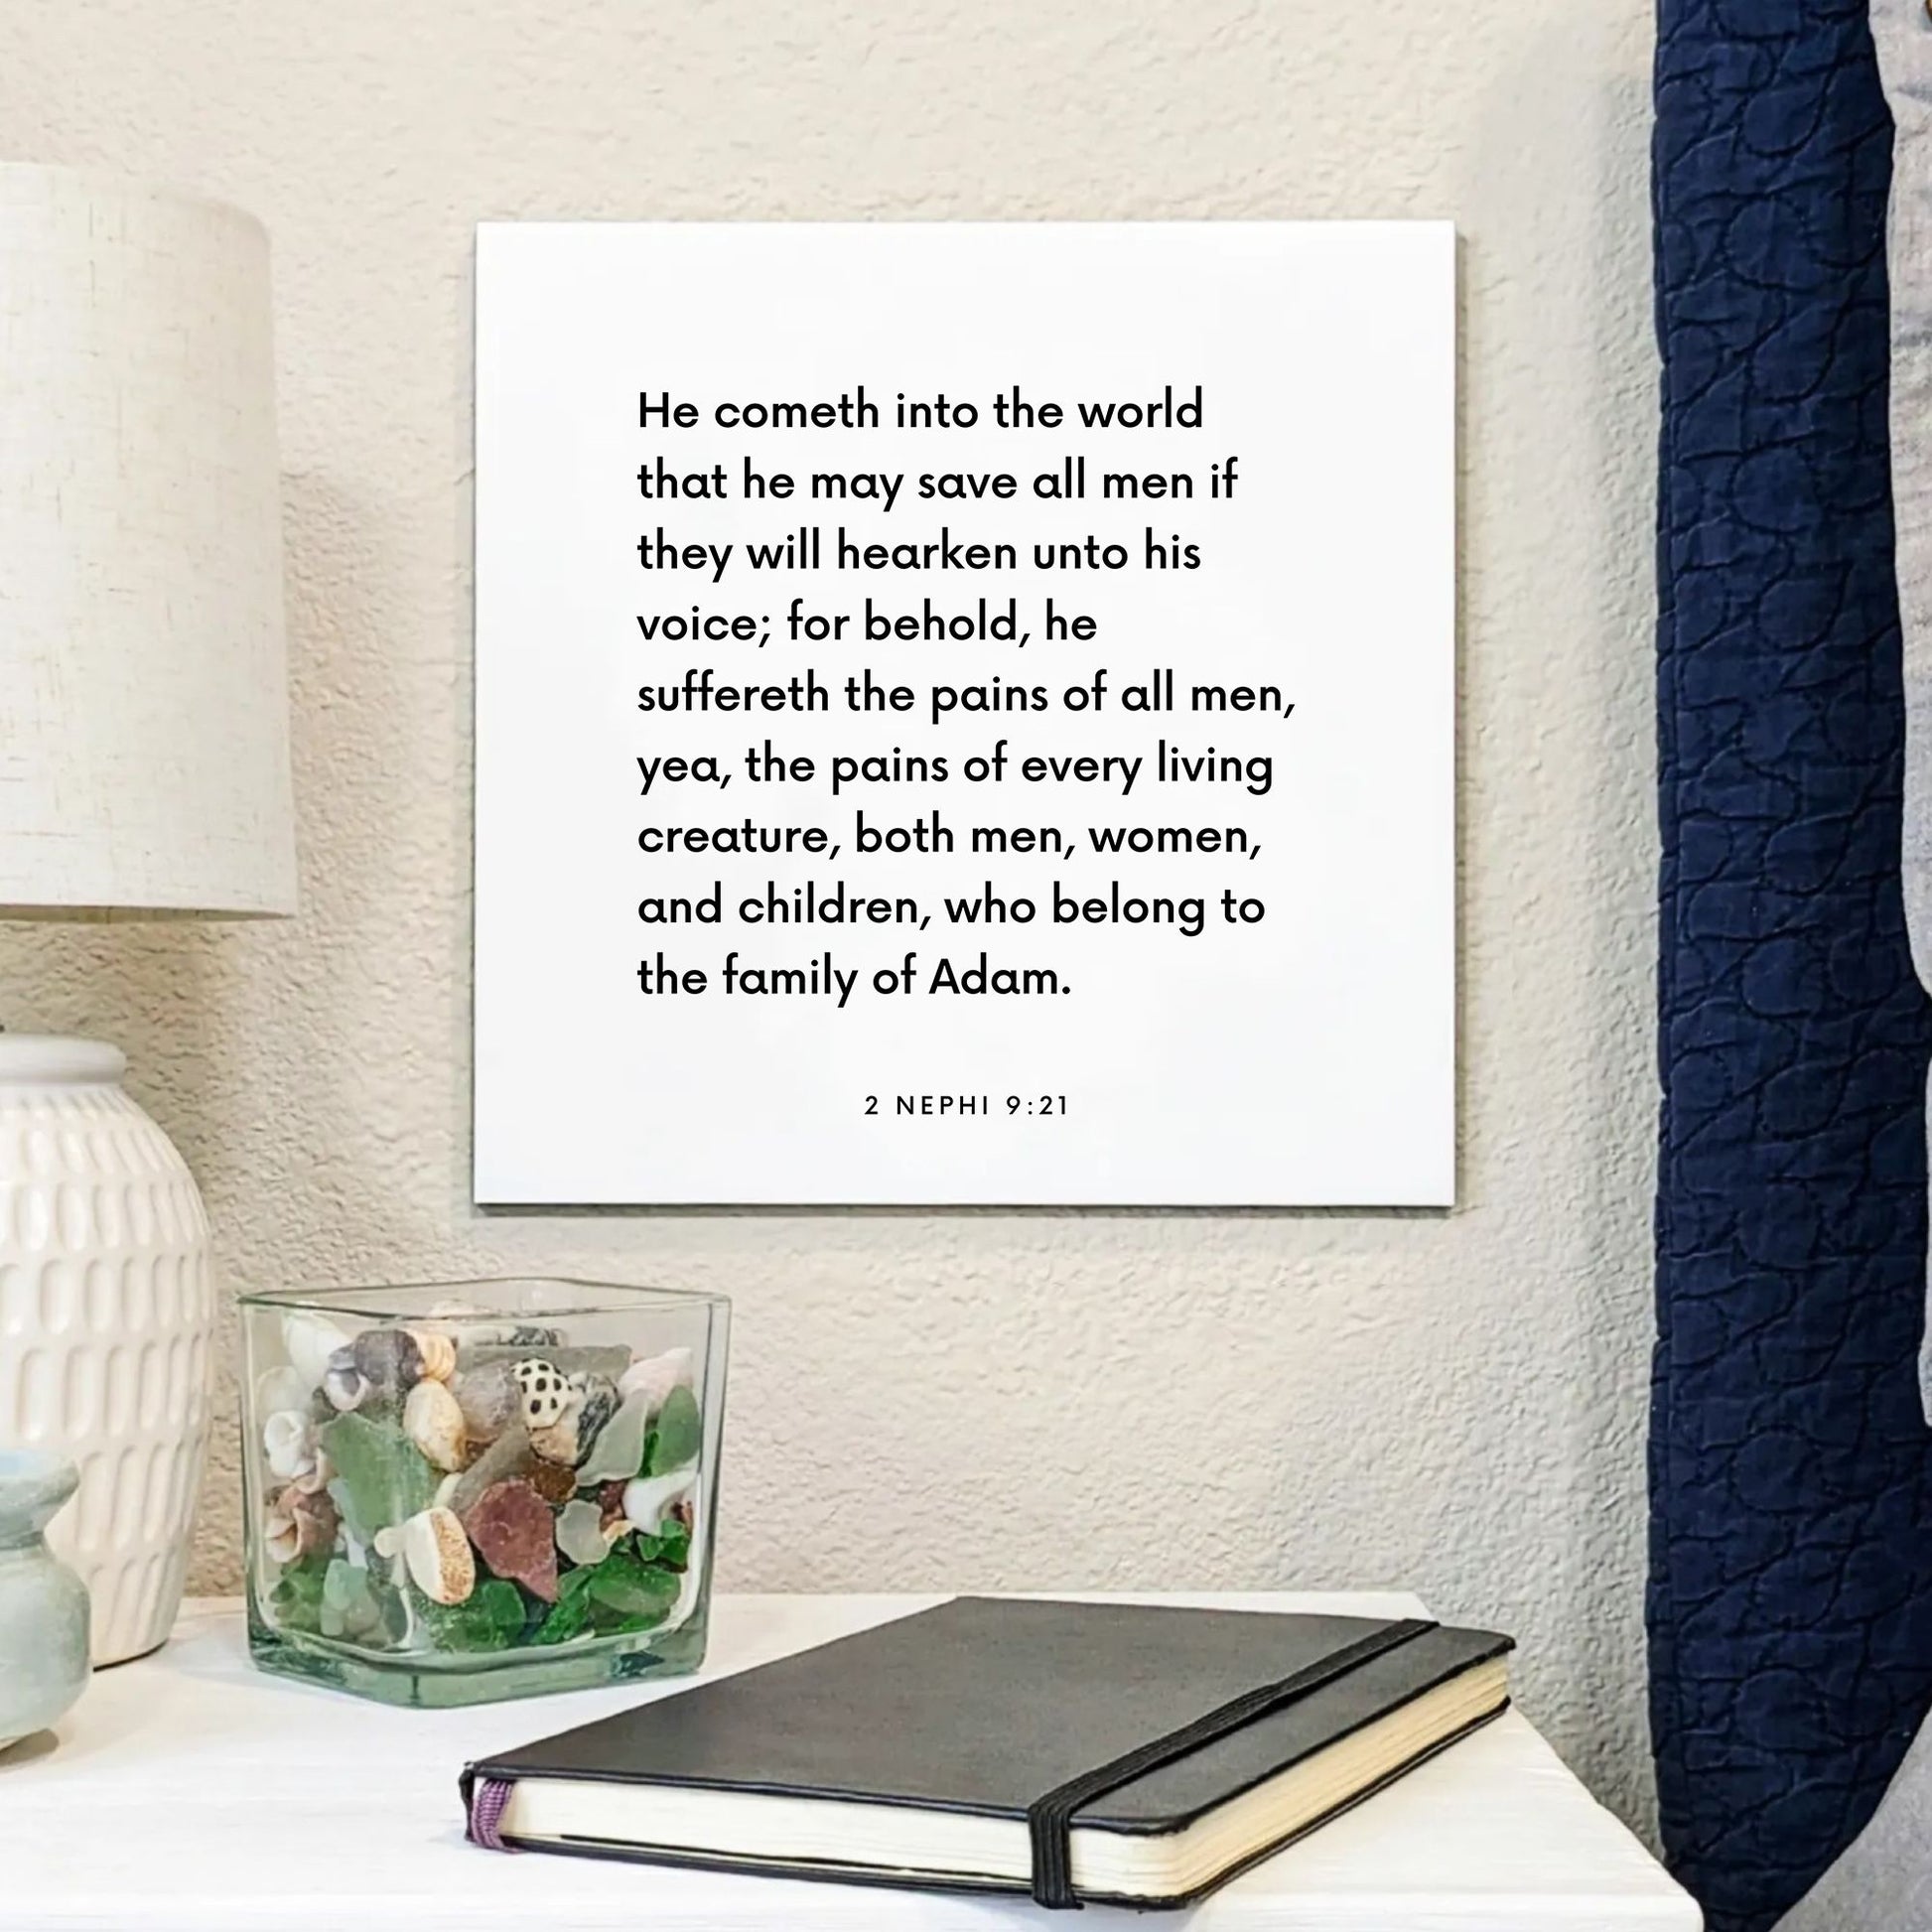 Bedside mouting of the scripture tile for 2 Nephi 9:21 - "He suffereth the pains of every living creature"